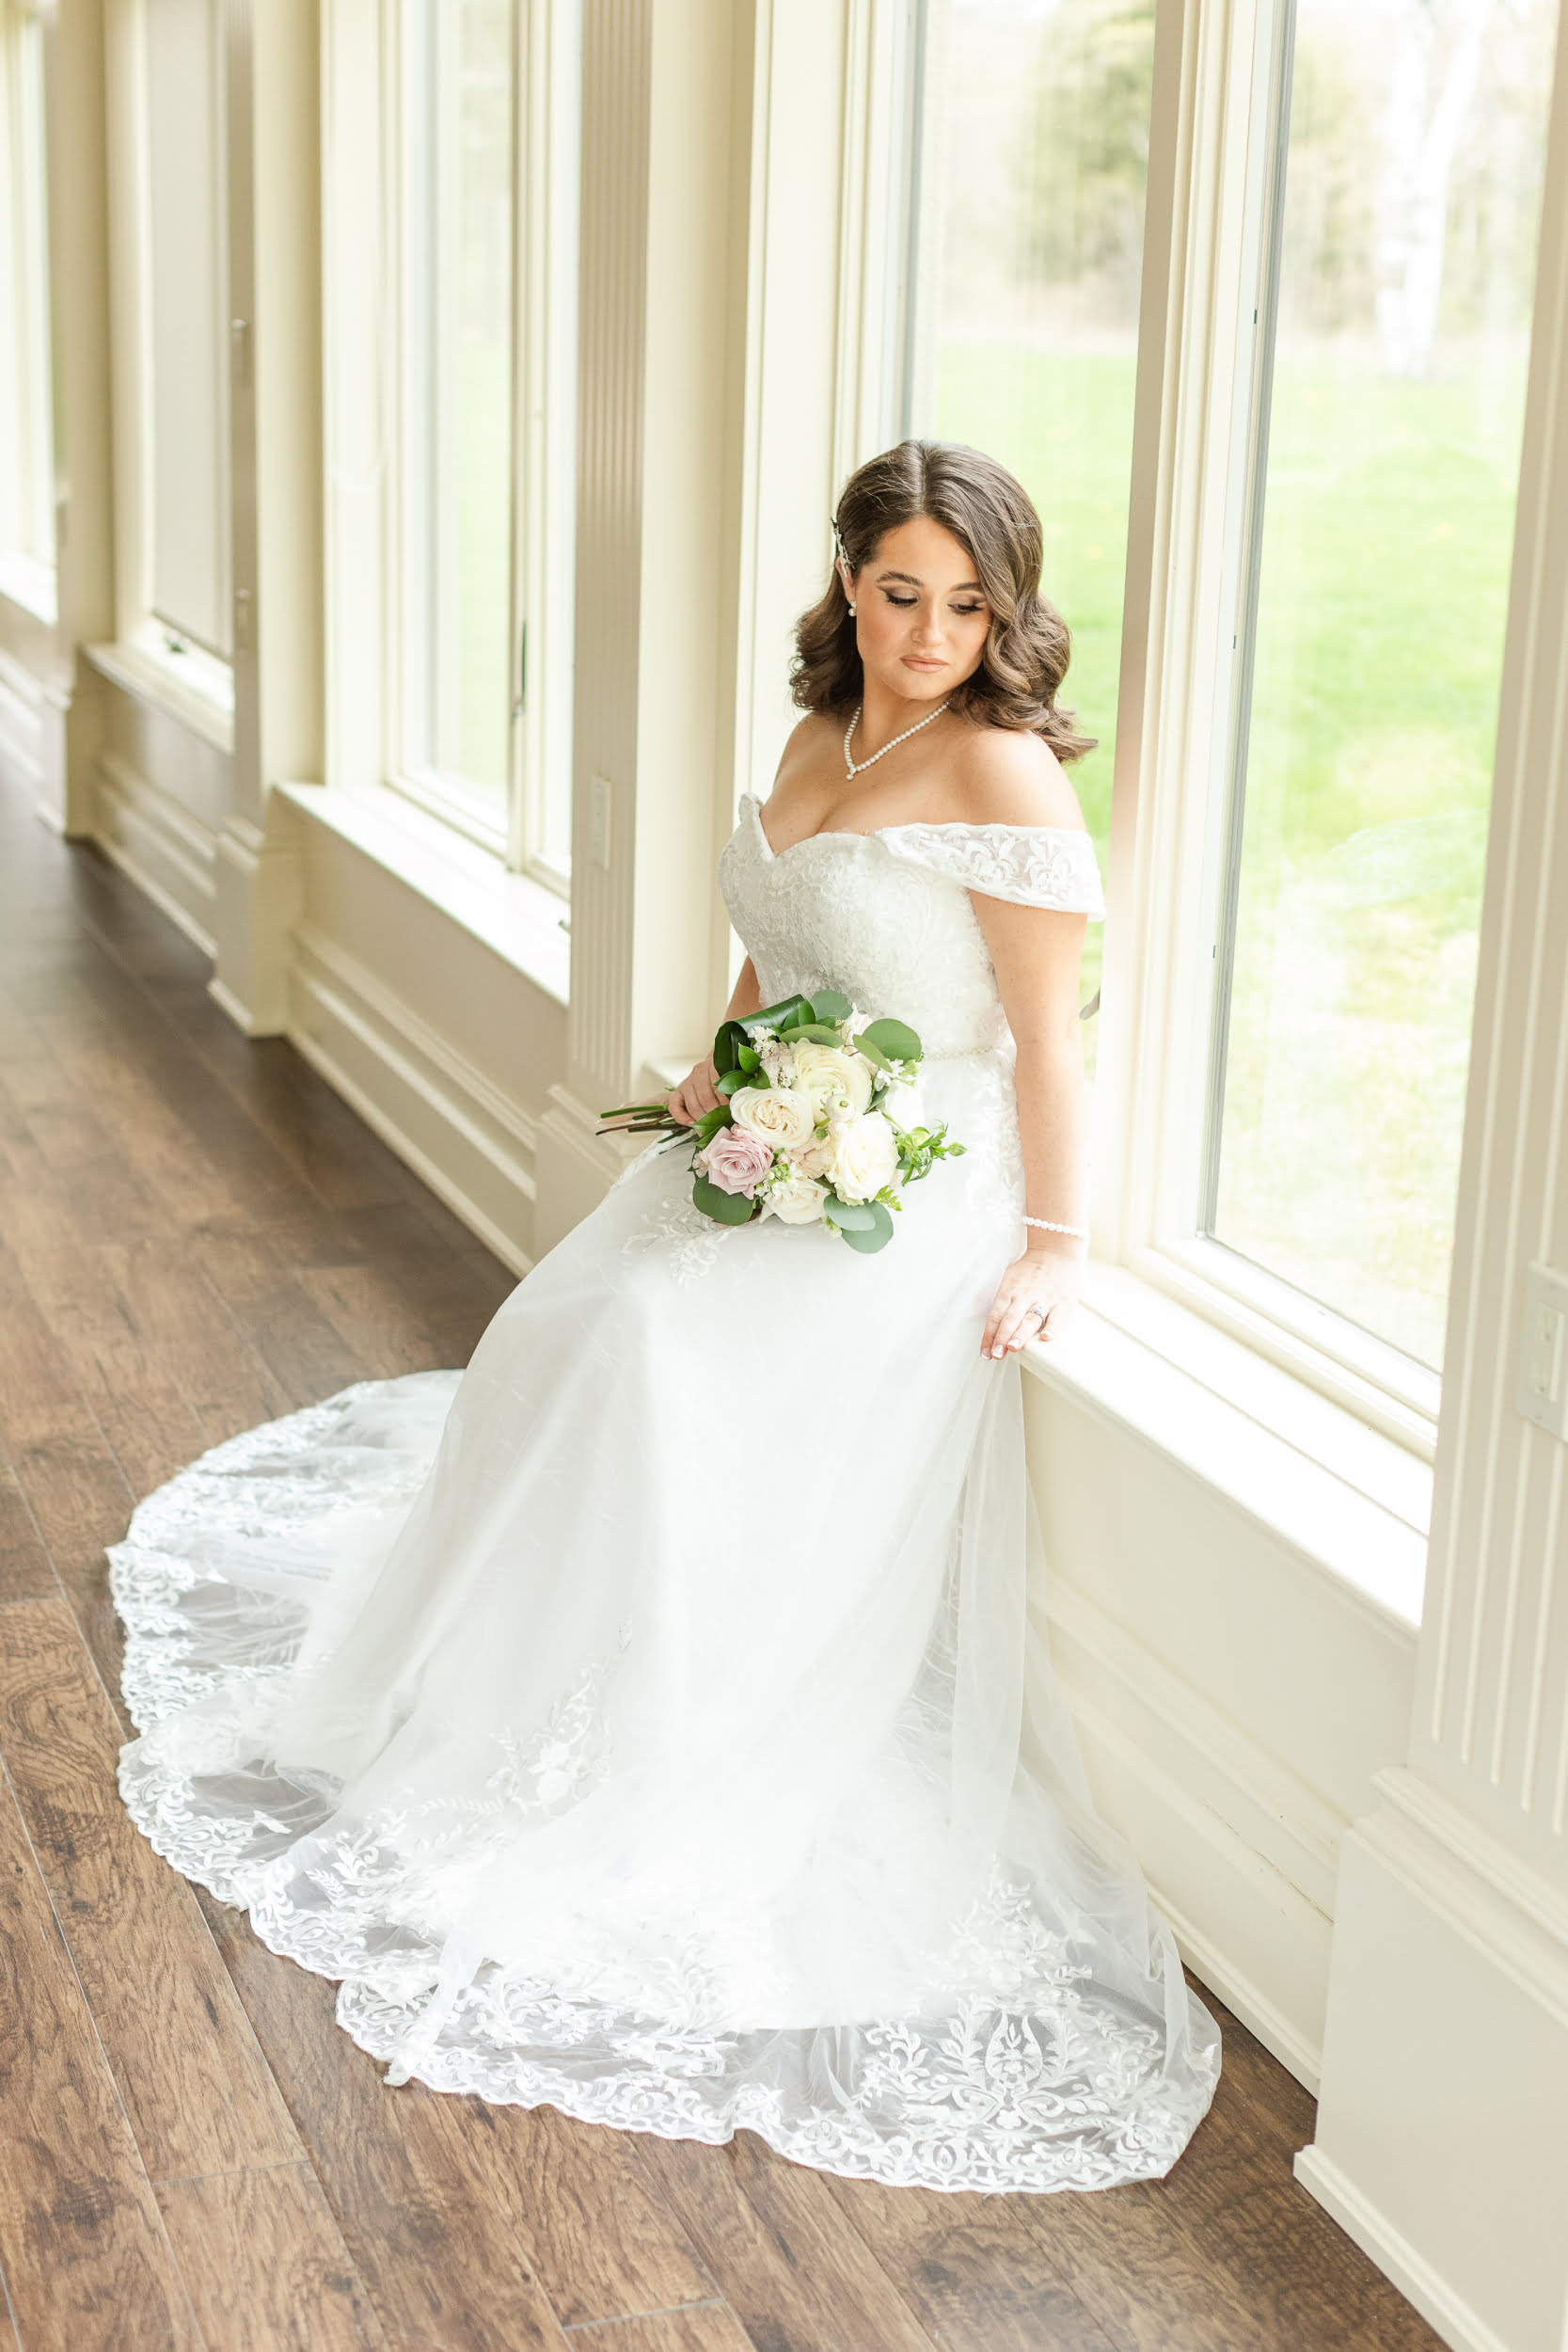 A sparkling gown named Elizabeth with an on or off-shoulder design, sweetheart neckline, and intricate sequin embellishments on the bodice. The dress features a beaded waistline, chapel length train with embroidered lace appliqués, and a corset back design.